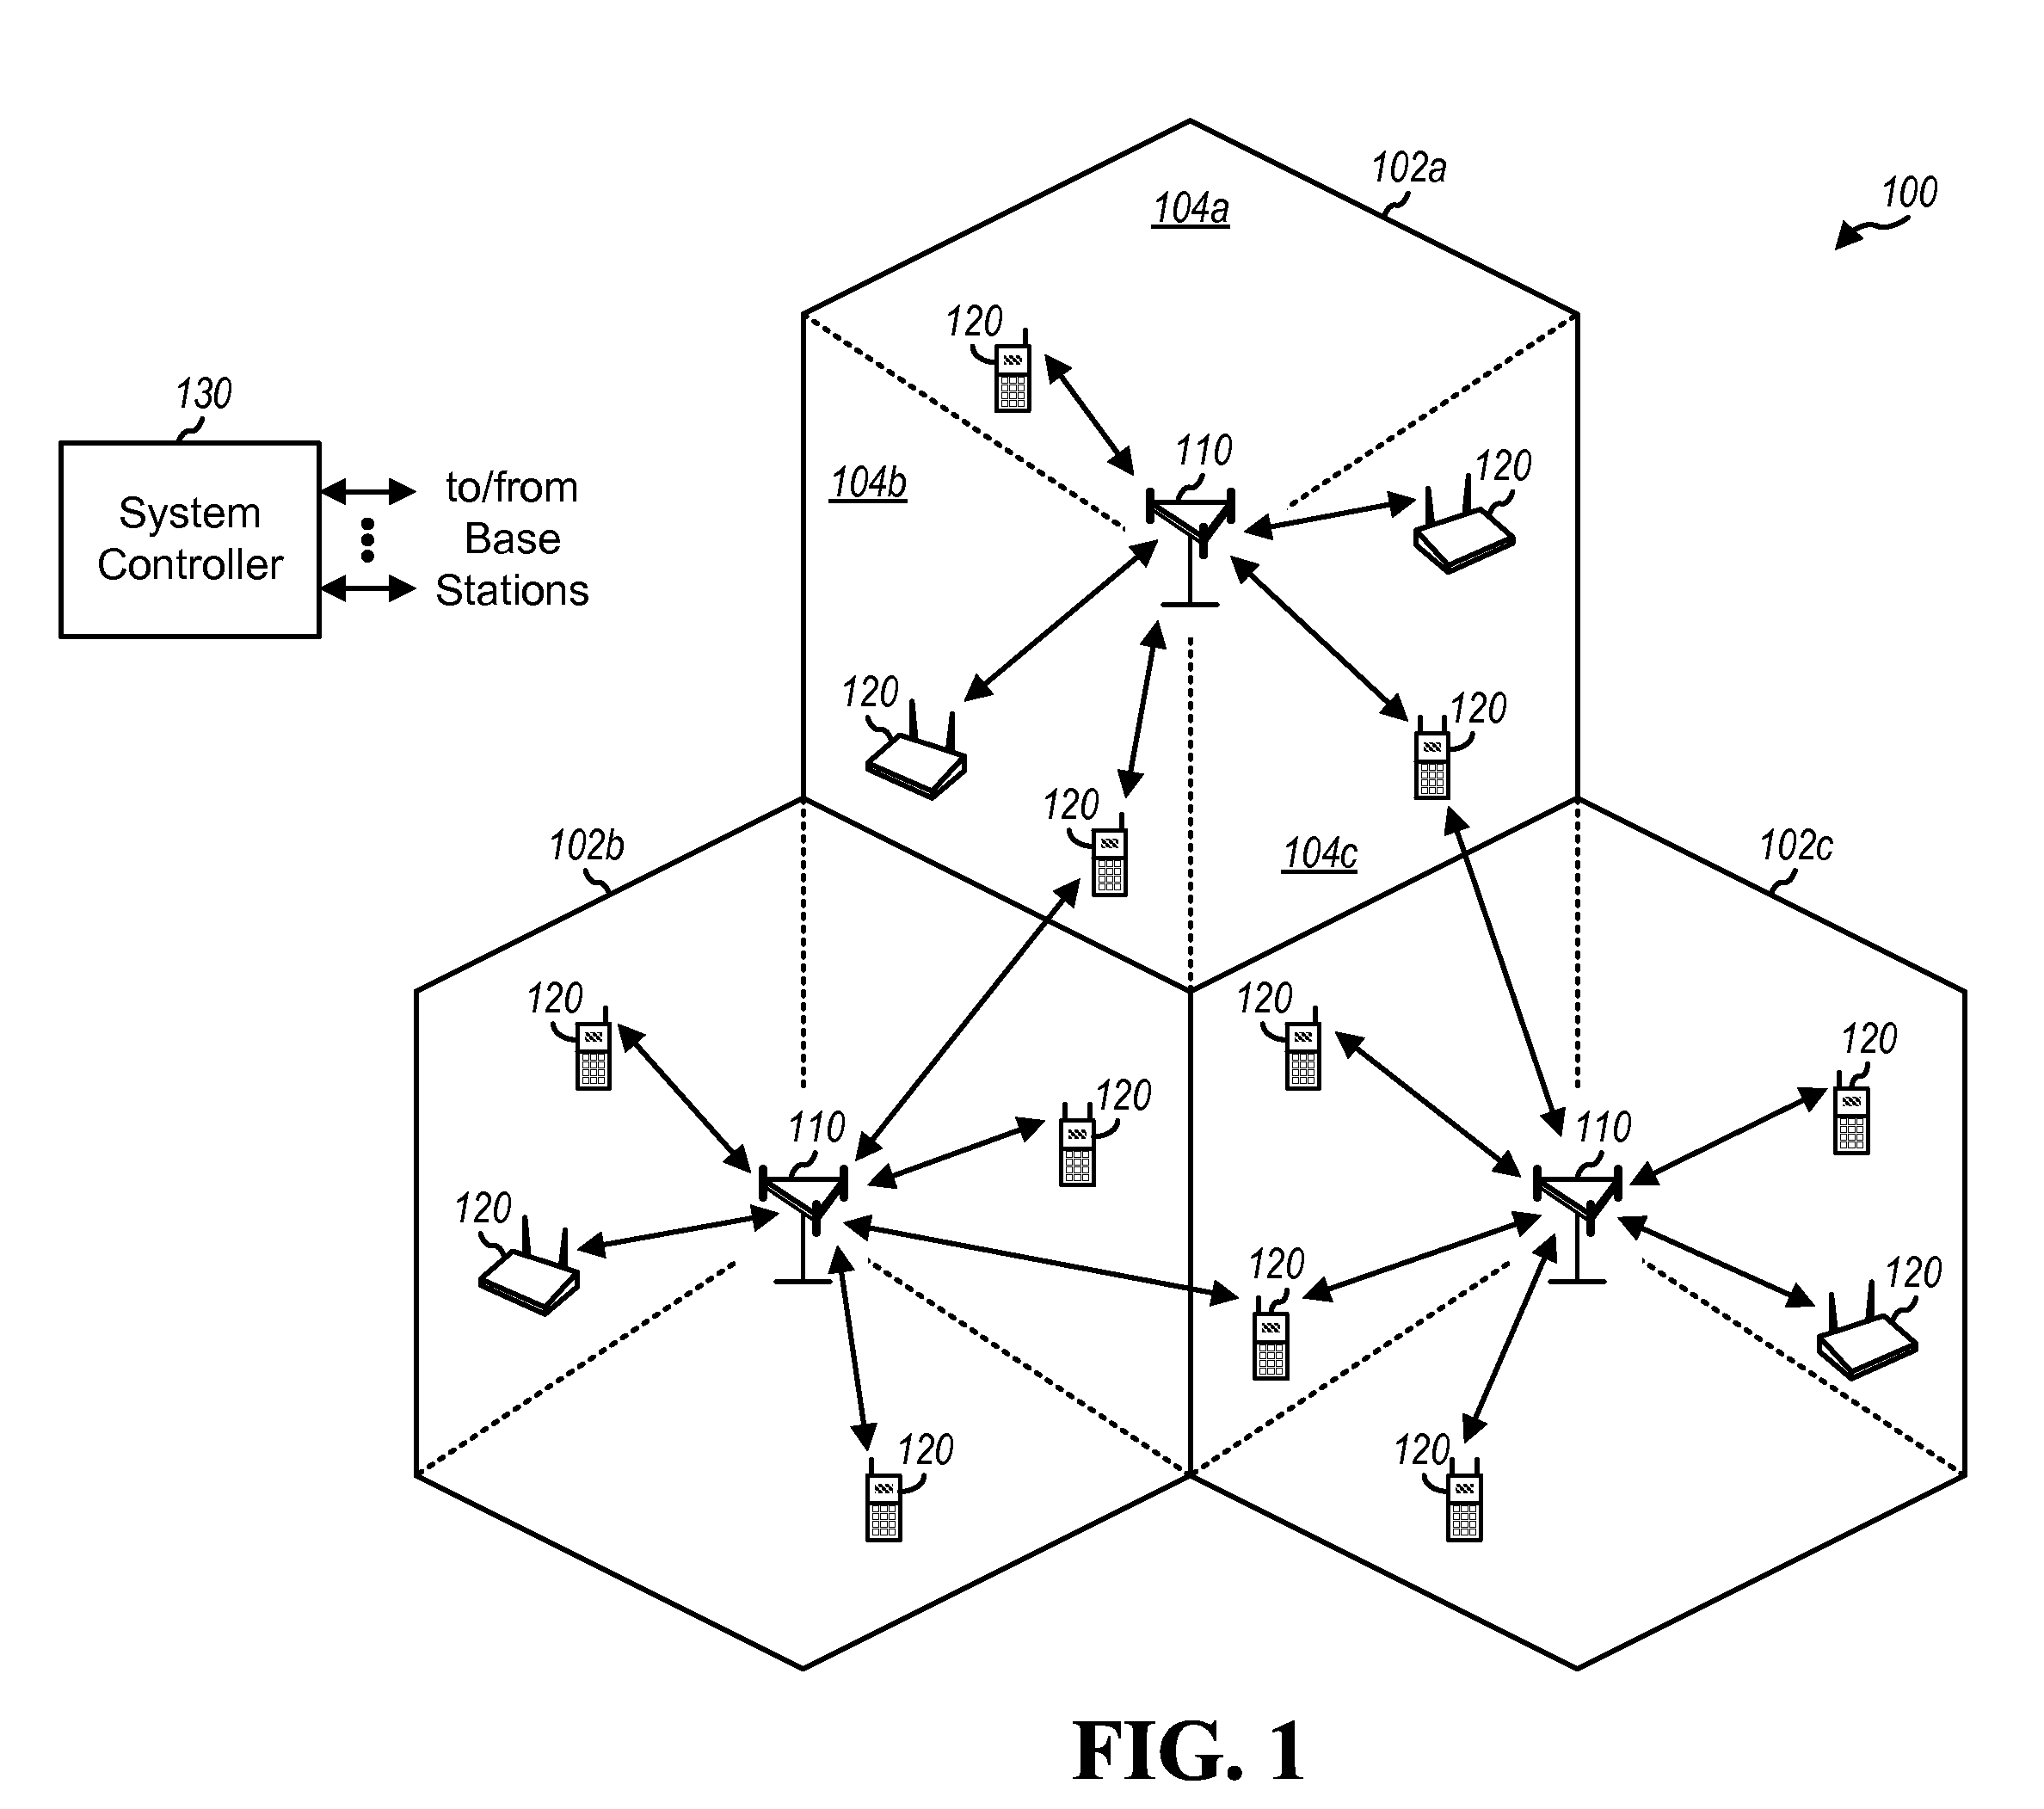 Method of improving throughput in a system including persistent assignments